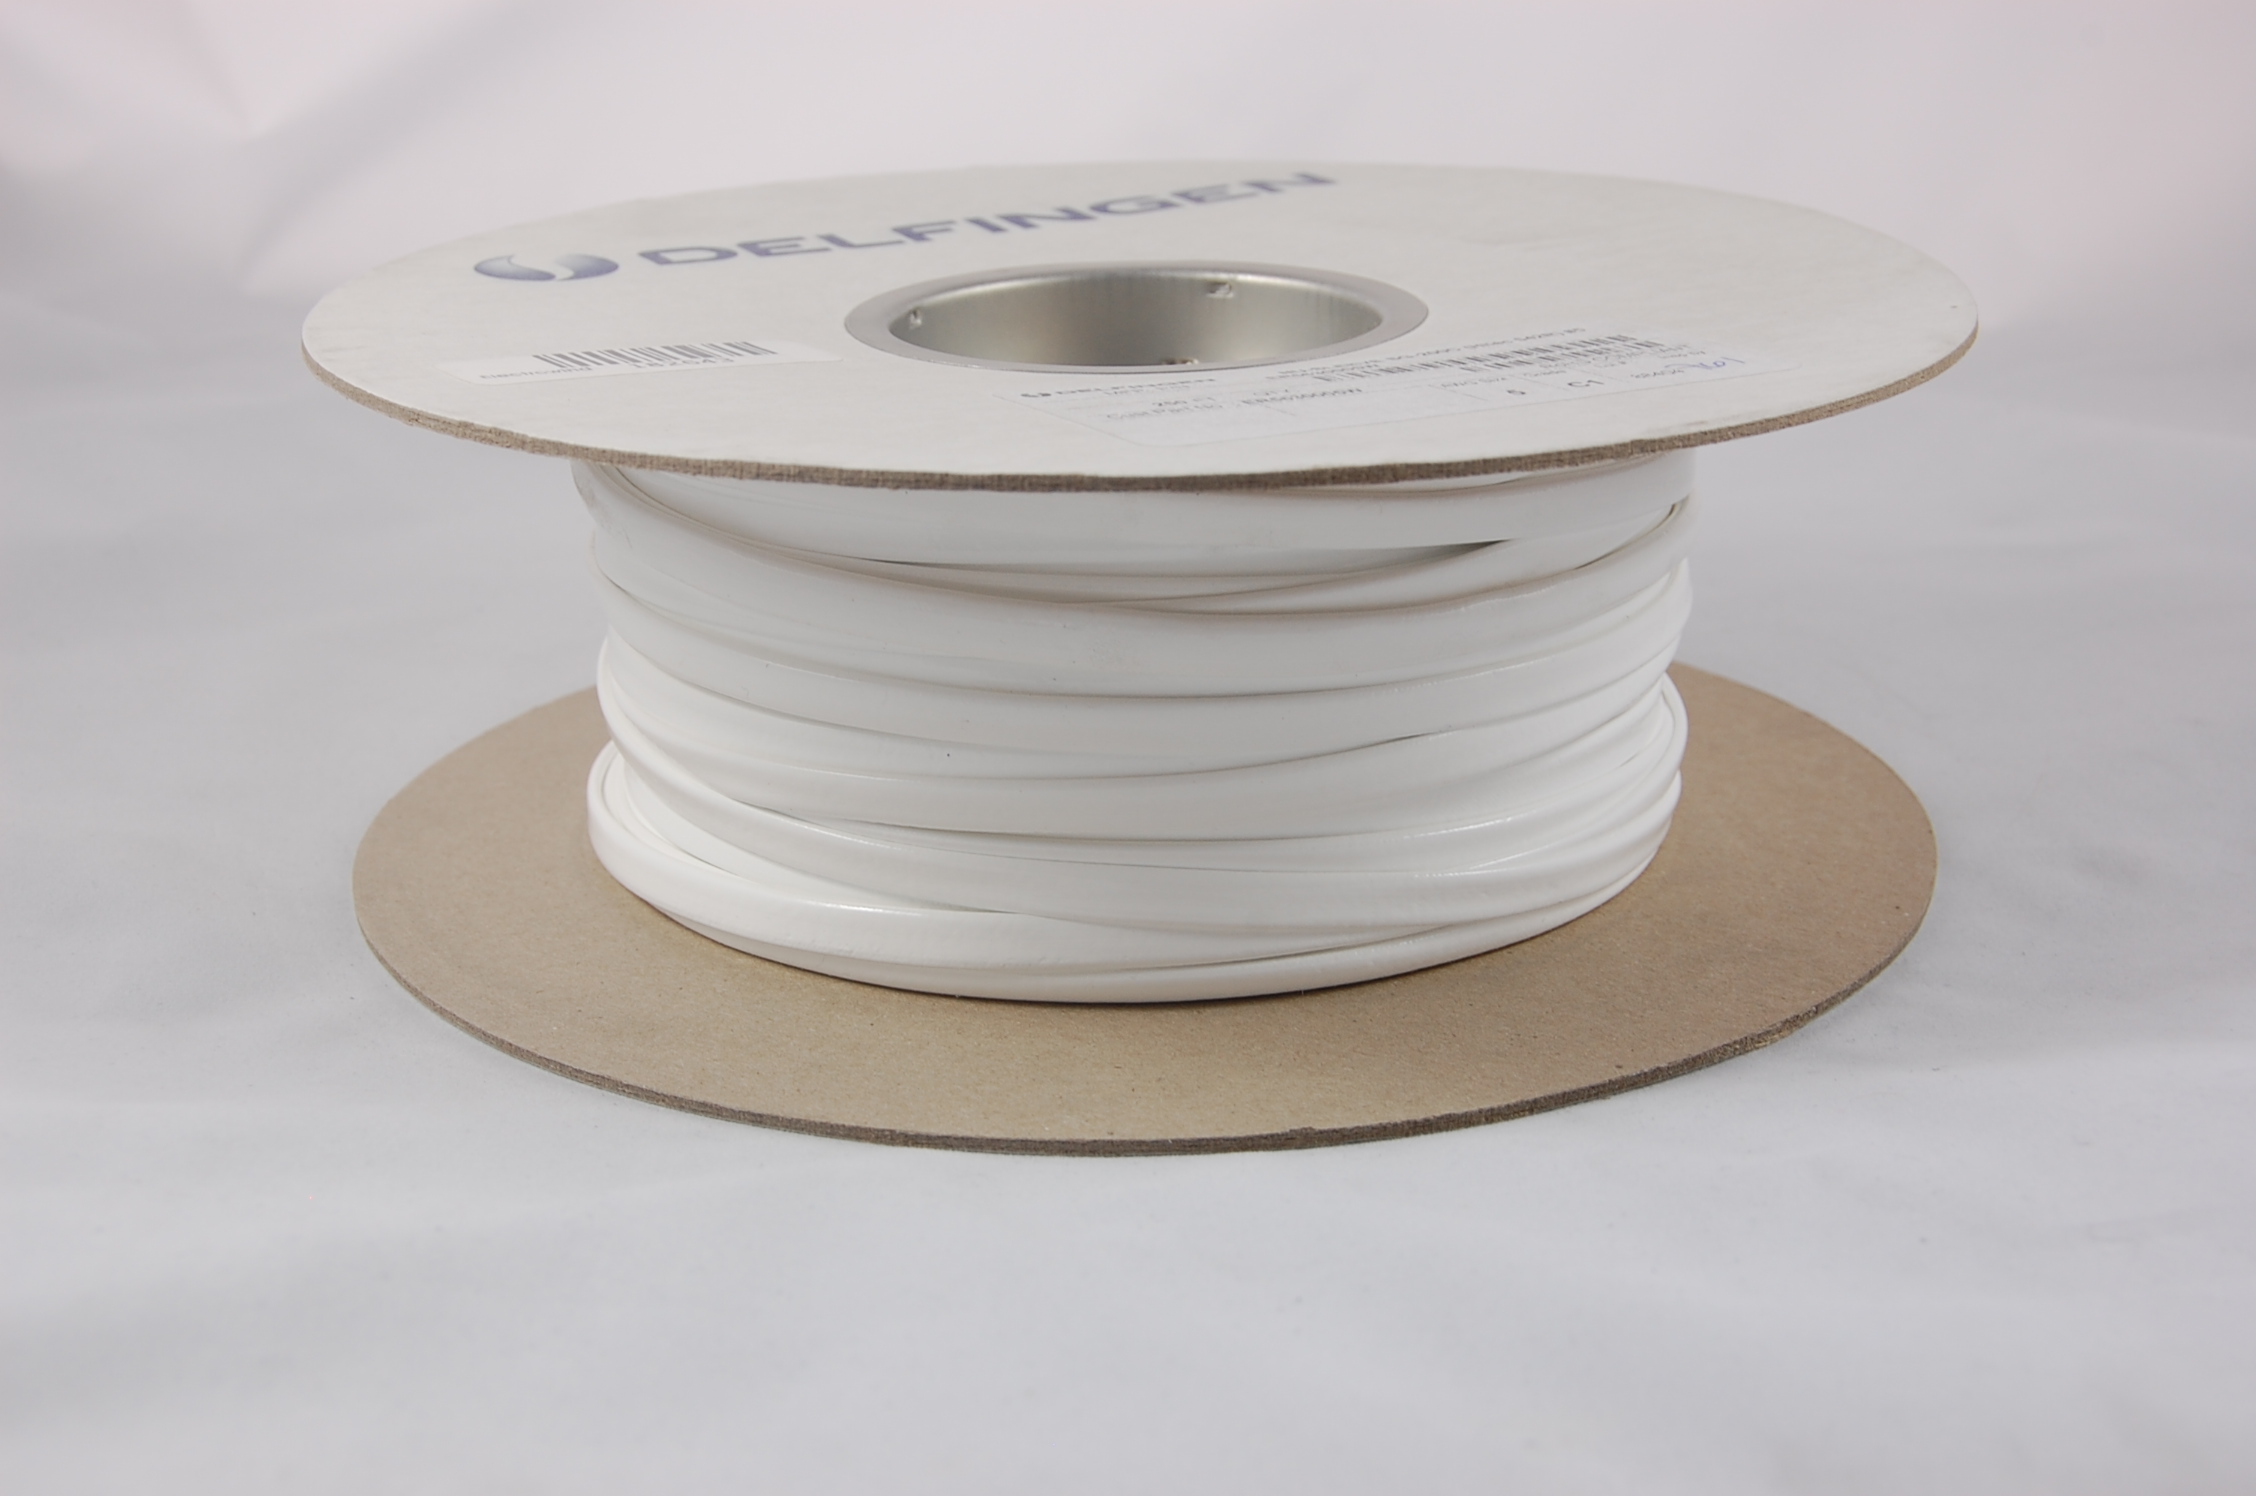 #2 AWG NU-SLEEVE SG-200 C-1 (2500V) Silicone Rubber Coated Braided Fiberglass Sleeving (542F) 200°C, white, 250 FT per spool